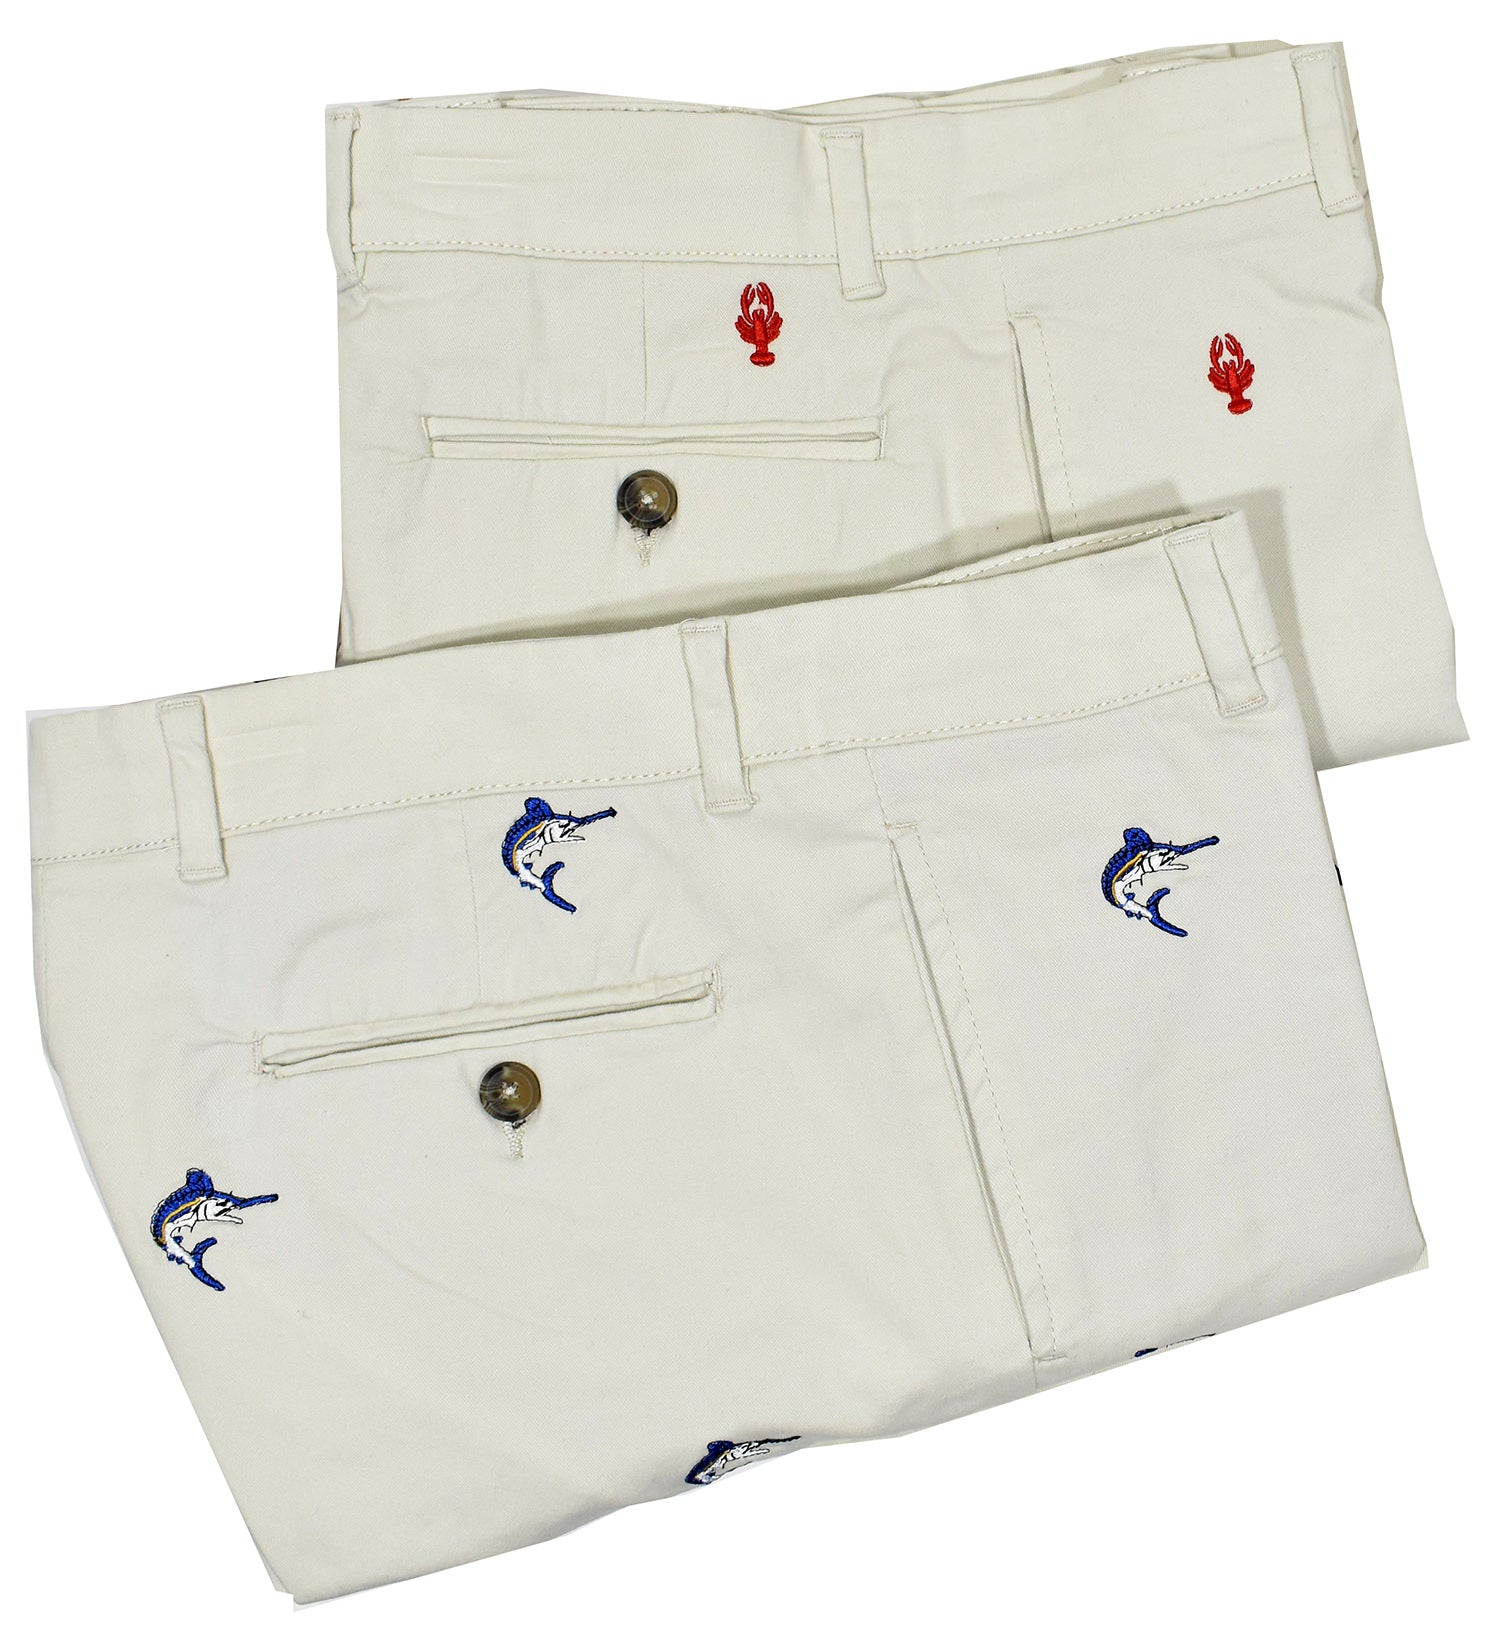 Add a twist of style this Spring/Summer with our embroidered walk shorts.  The cotton, fine twill fabric with stretch makes comfort a given and the allover embroidery adds unique style.  Classic fit and just above the knees length is perfect.  Choose from Marlins or Lobsters.